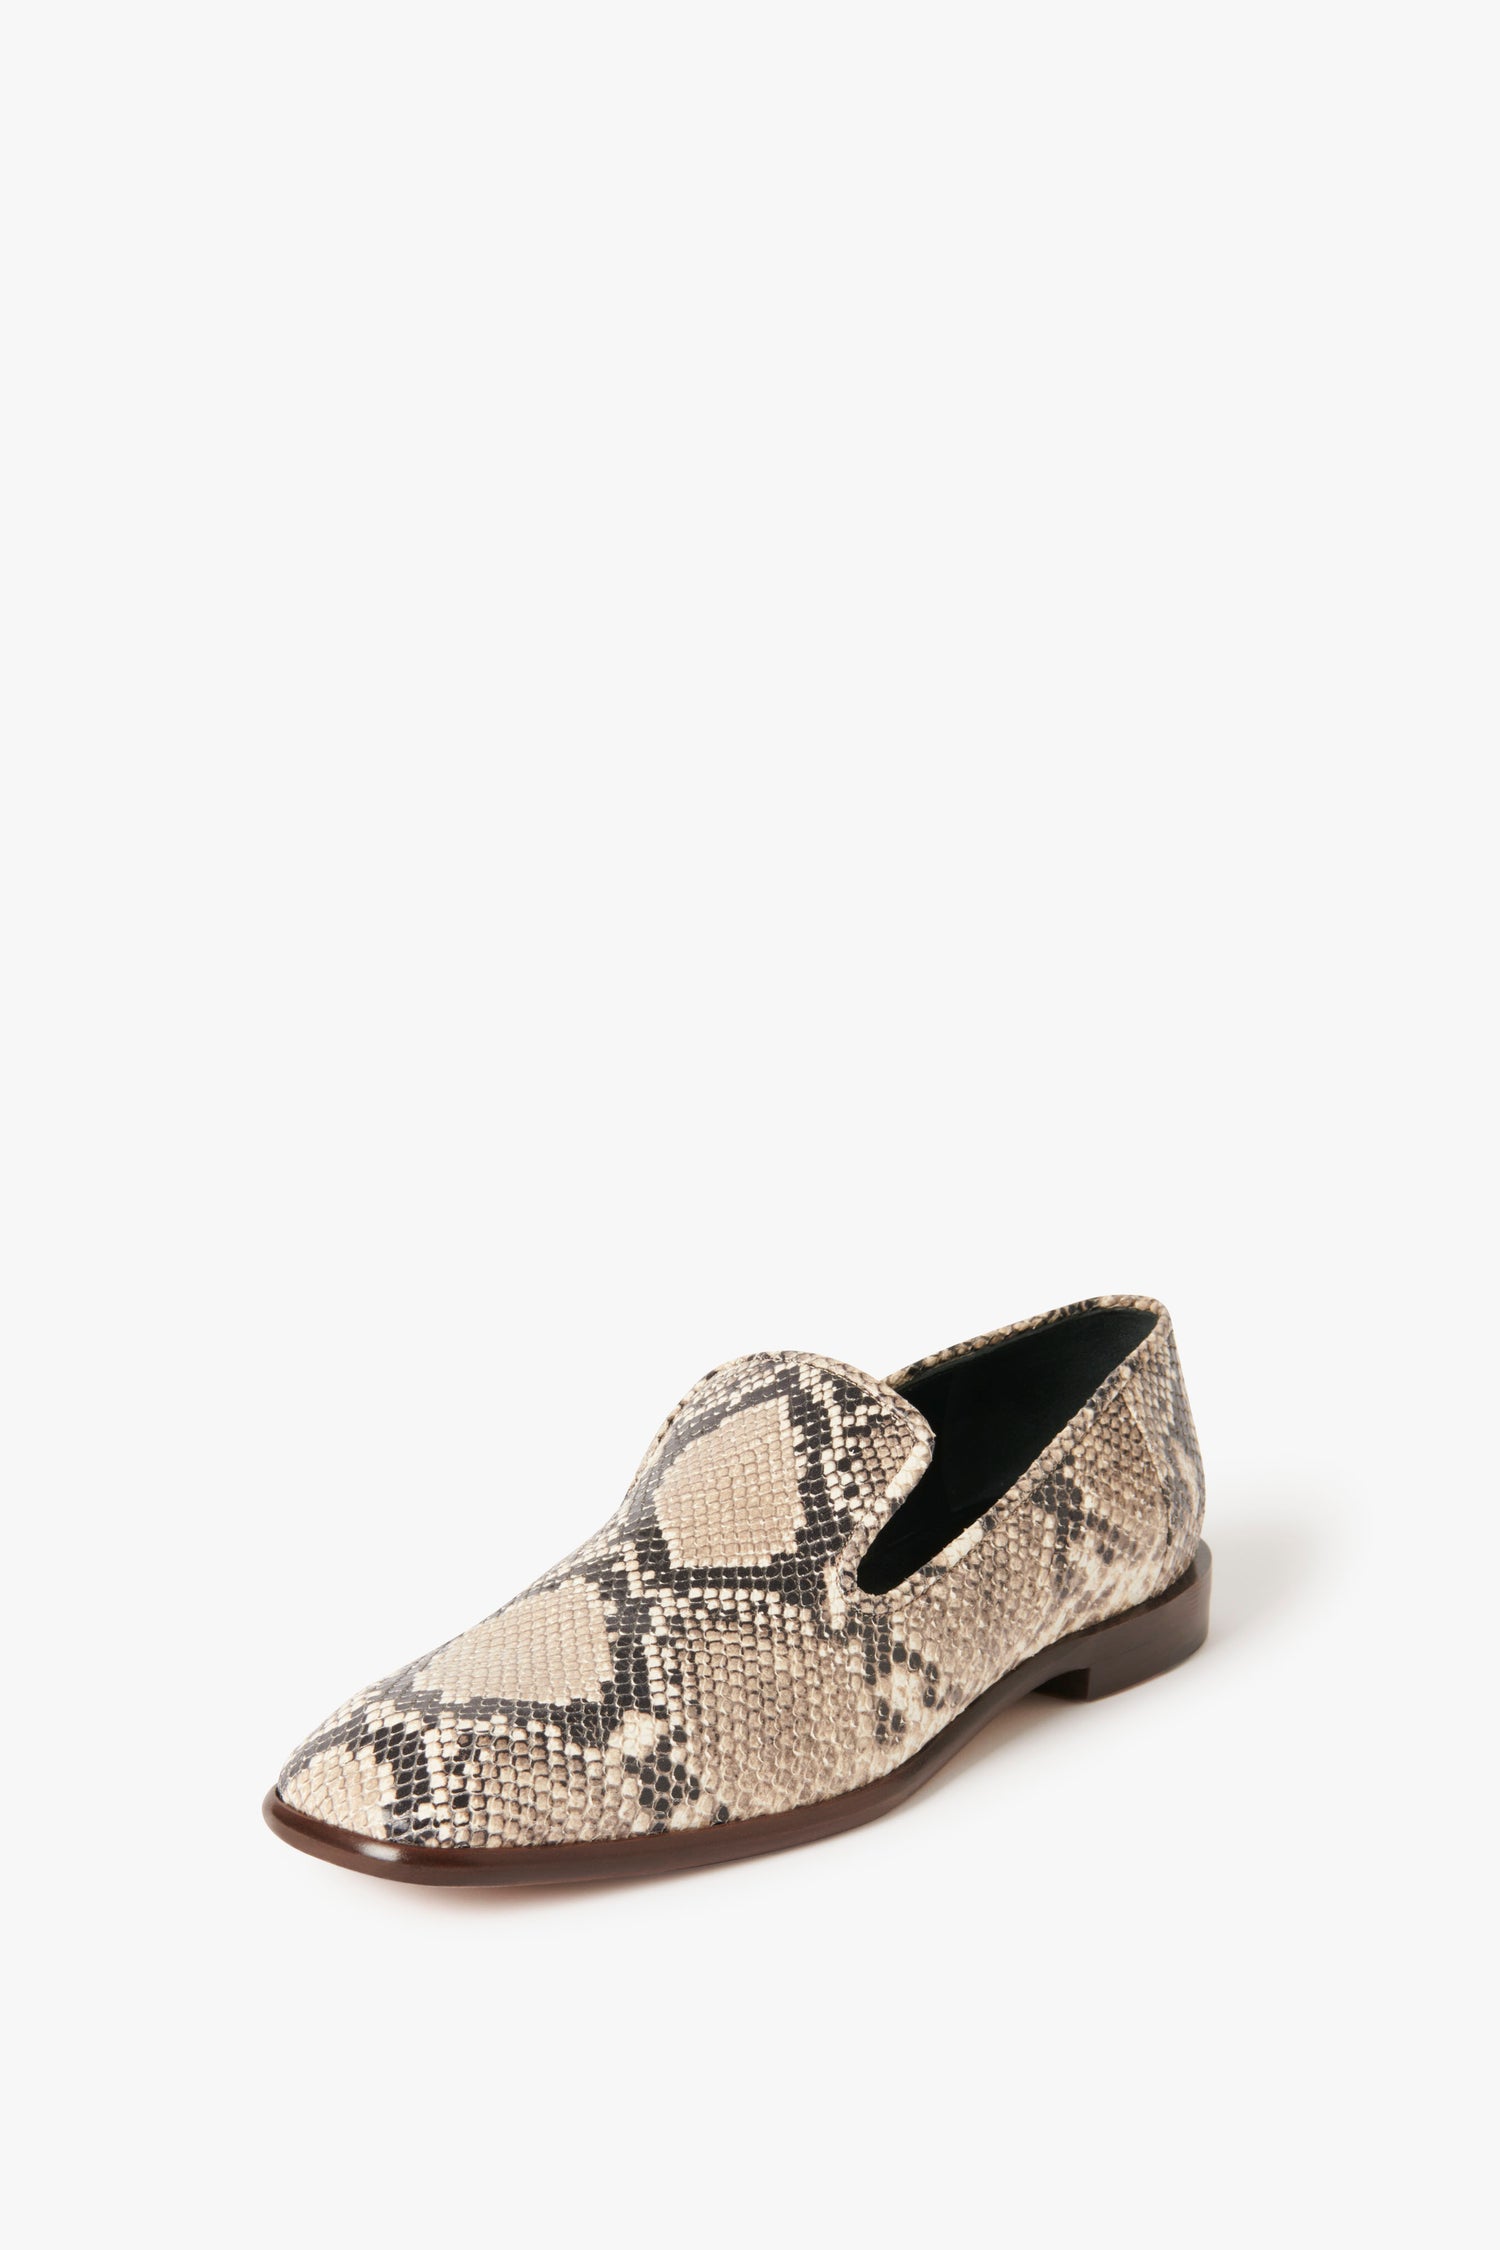 A single, Victoria Beckham Hanna Loafer in Beige Snake Print features a pointed toe and a low wooden heel, set against a white background.